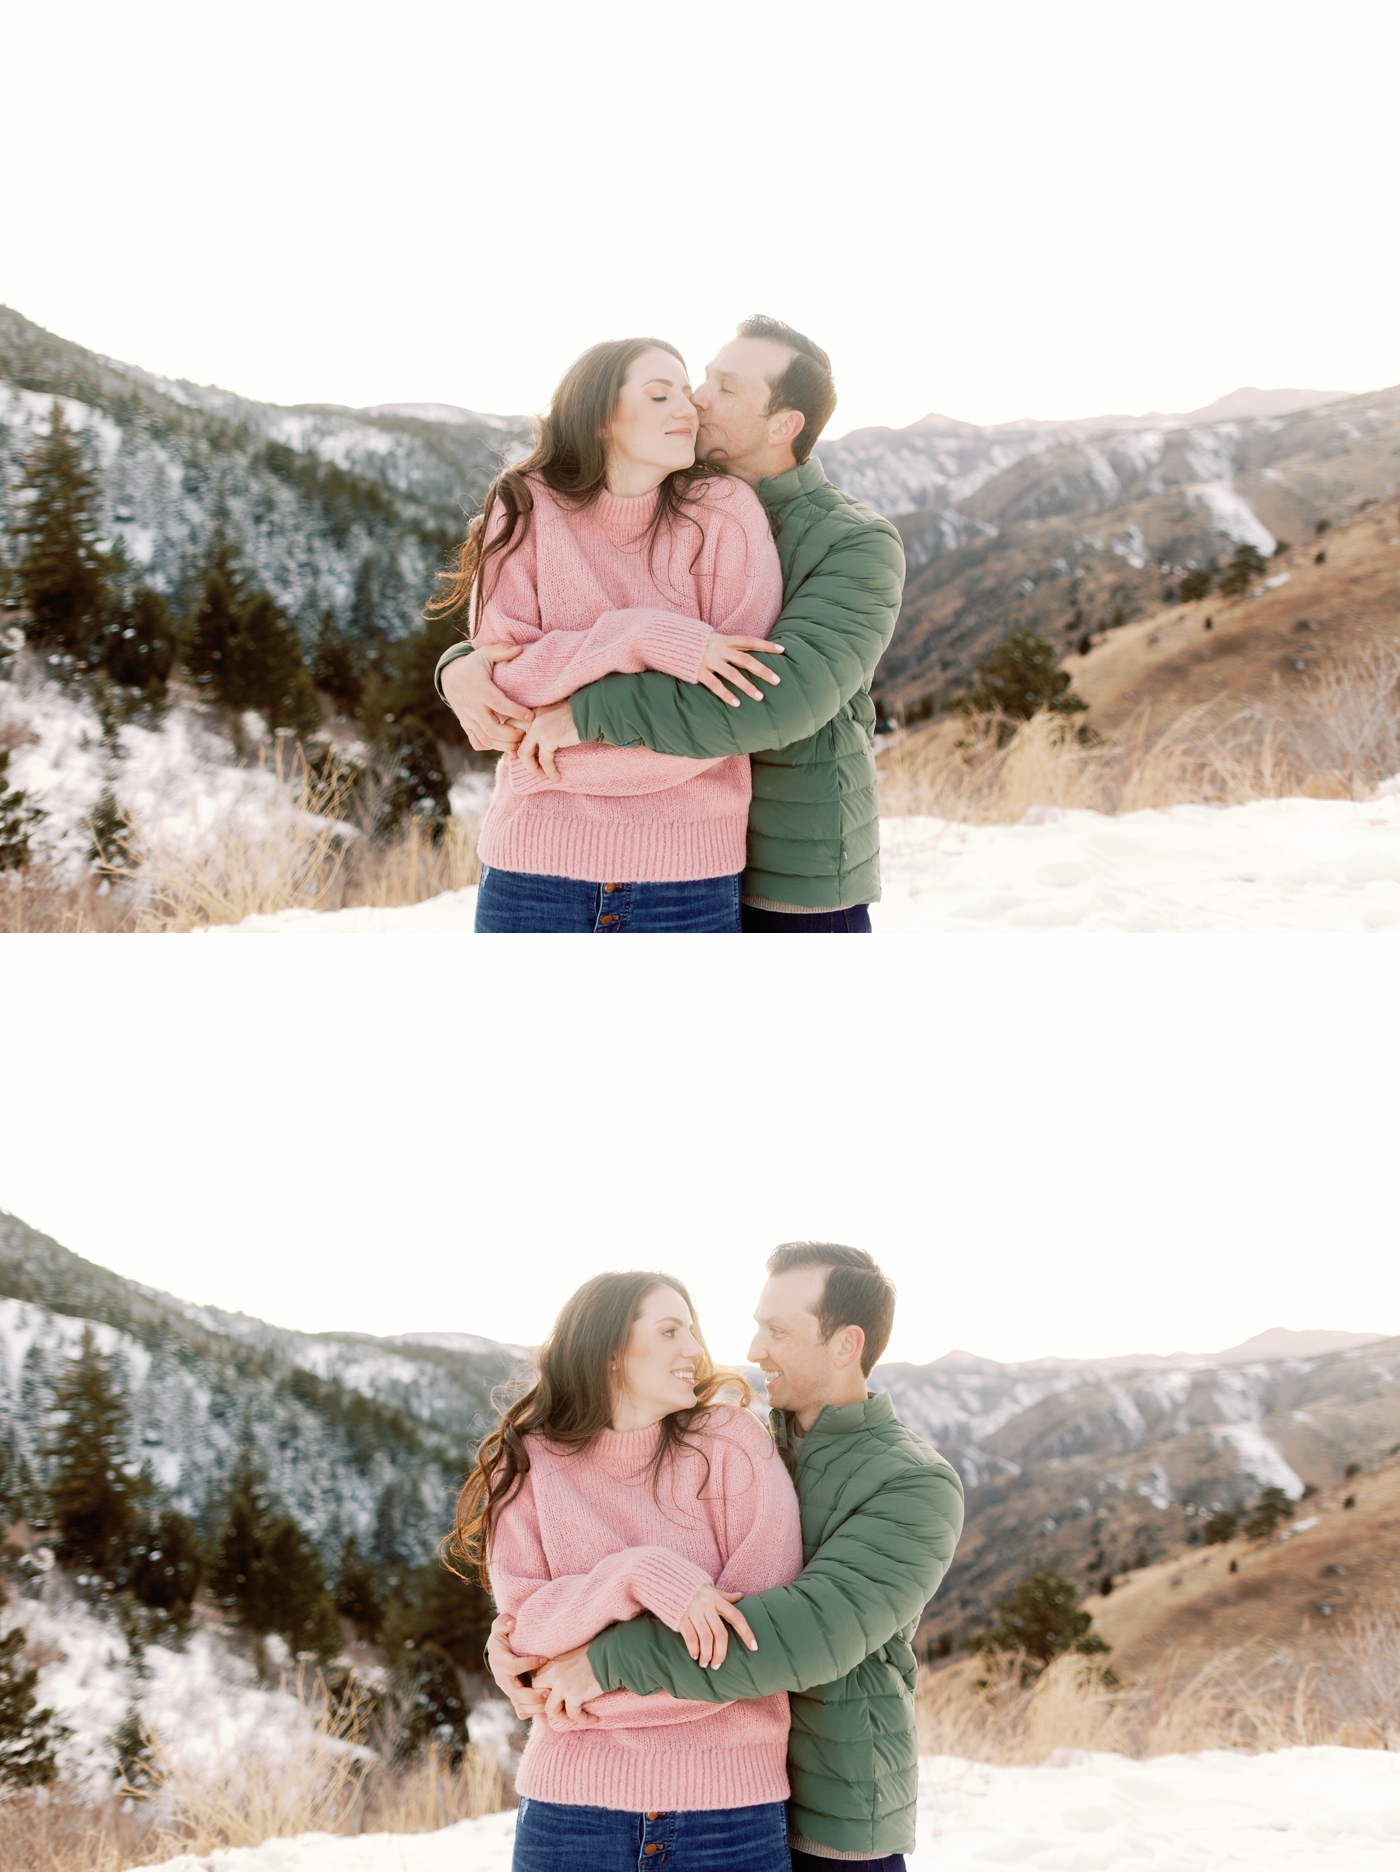 Snowy Engagement Session at Lookout Mountain in Colorado